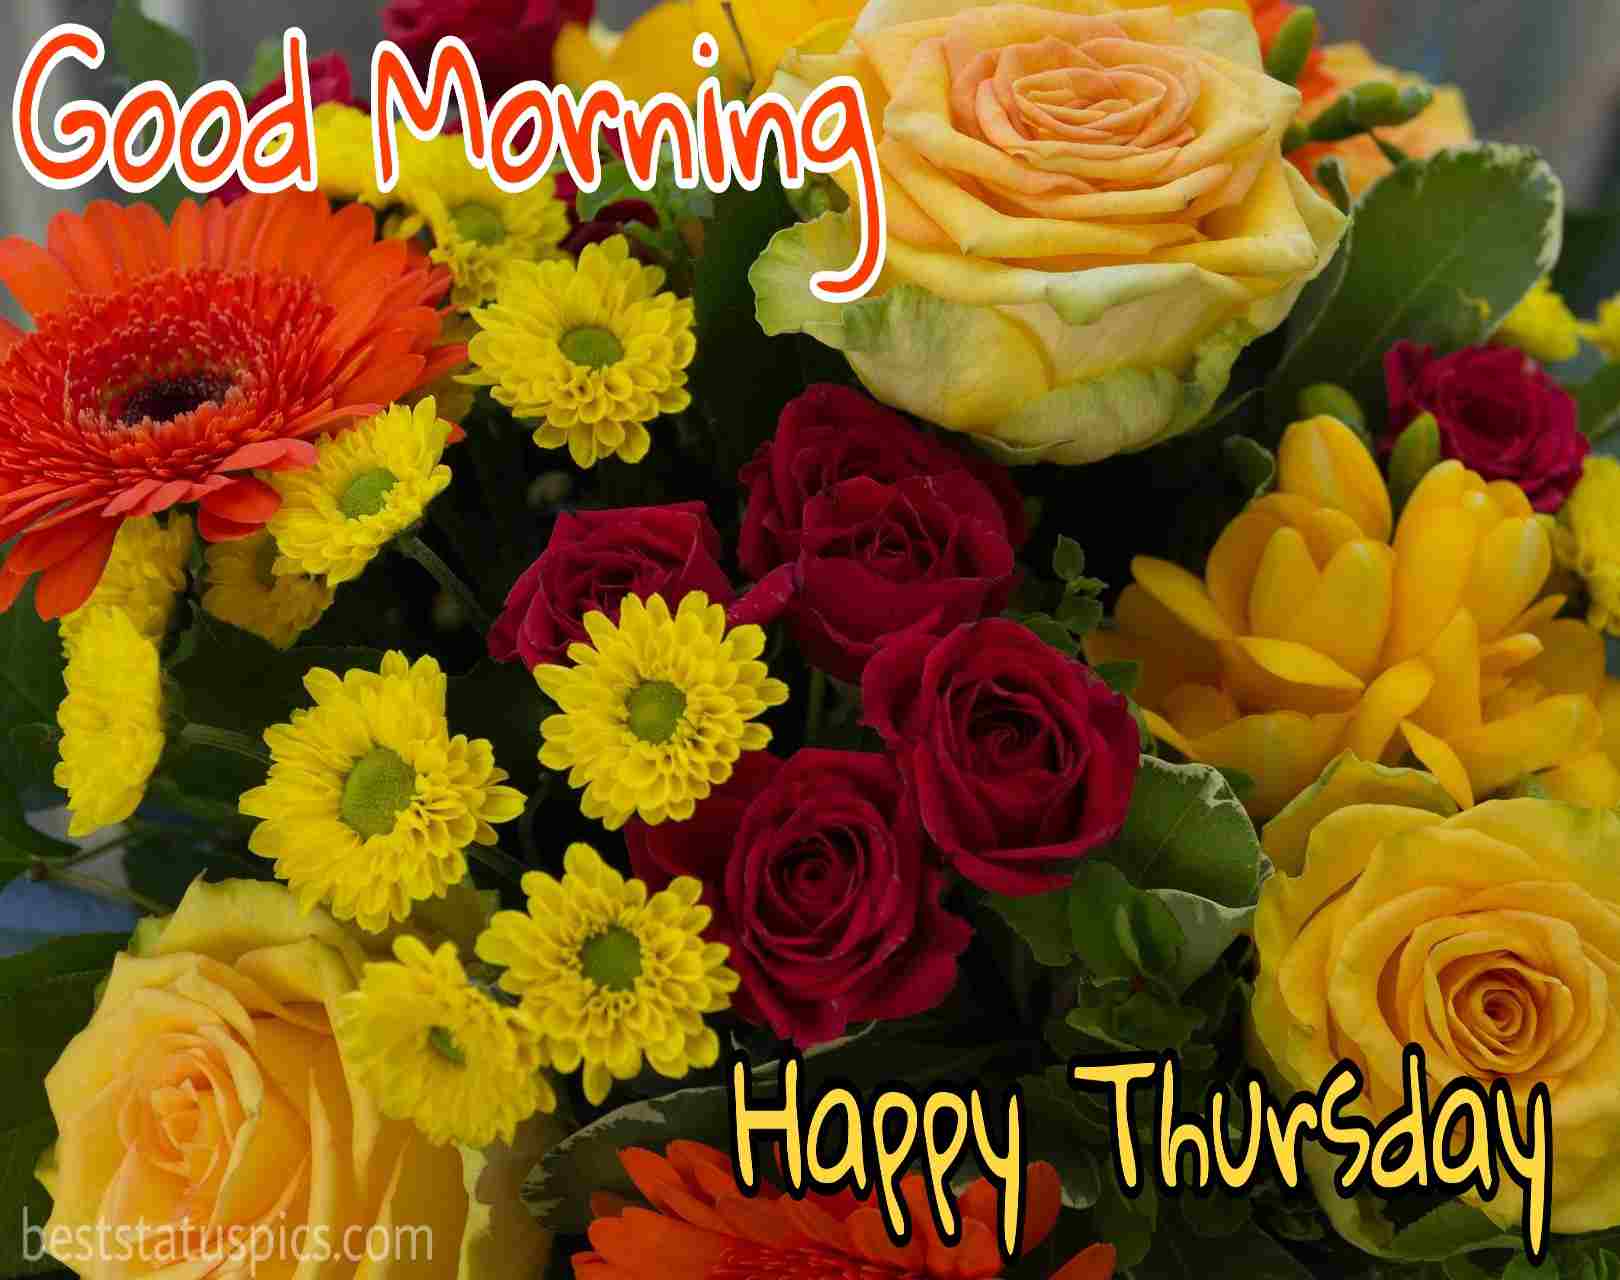 33+ Good Morning Happy Thursday Images, Wishes, Quotes - Best Status Pics